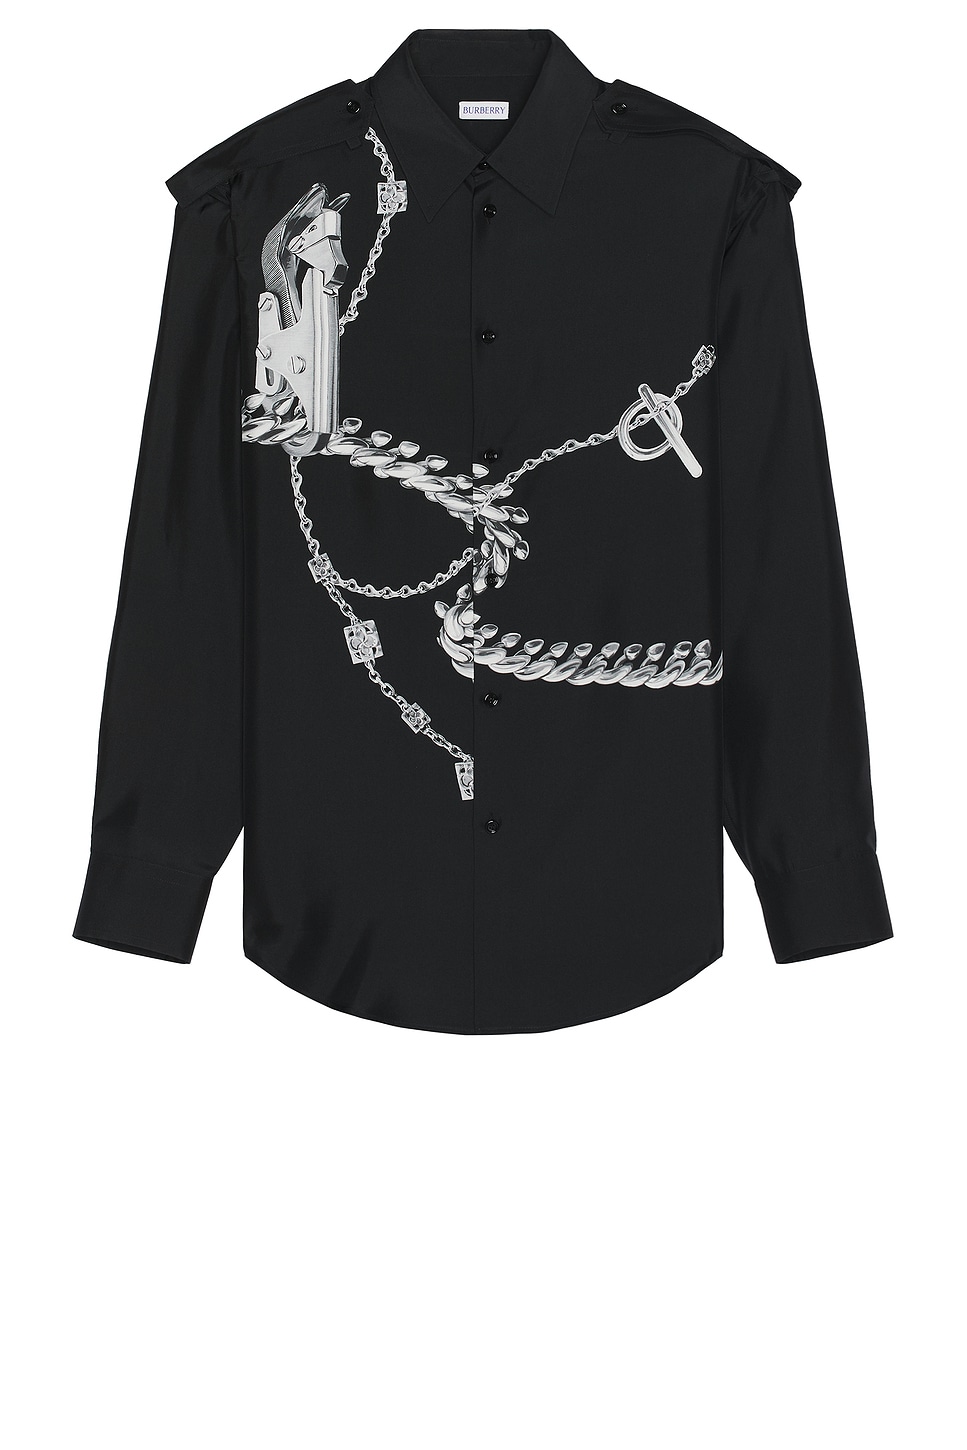 Image 1 of Burberry Shirt in Black